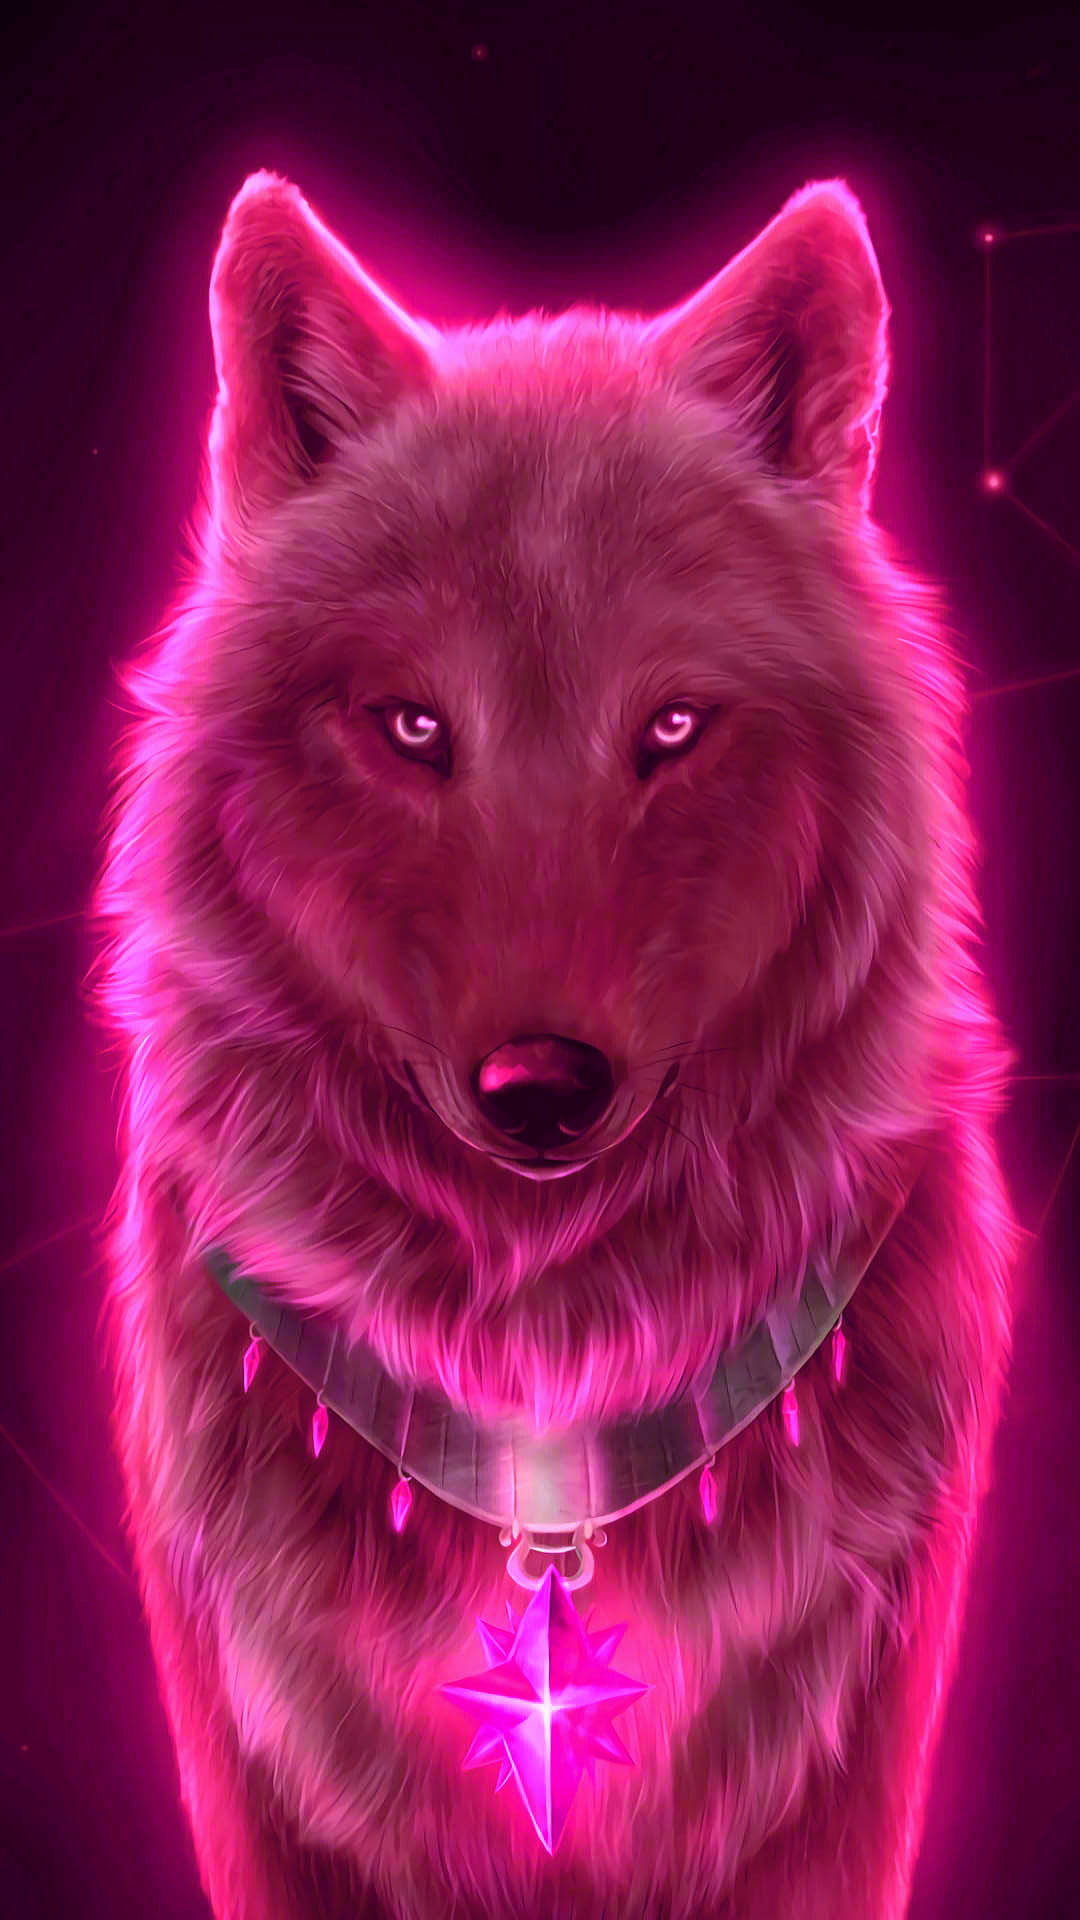 Free Anime Wolf Wallpaper Downloads, [100+] Anime Wolf Wallpapers for FREE  